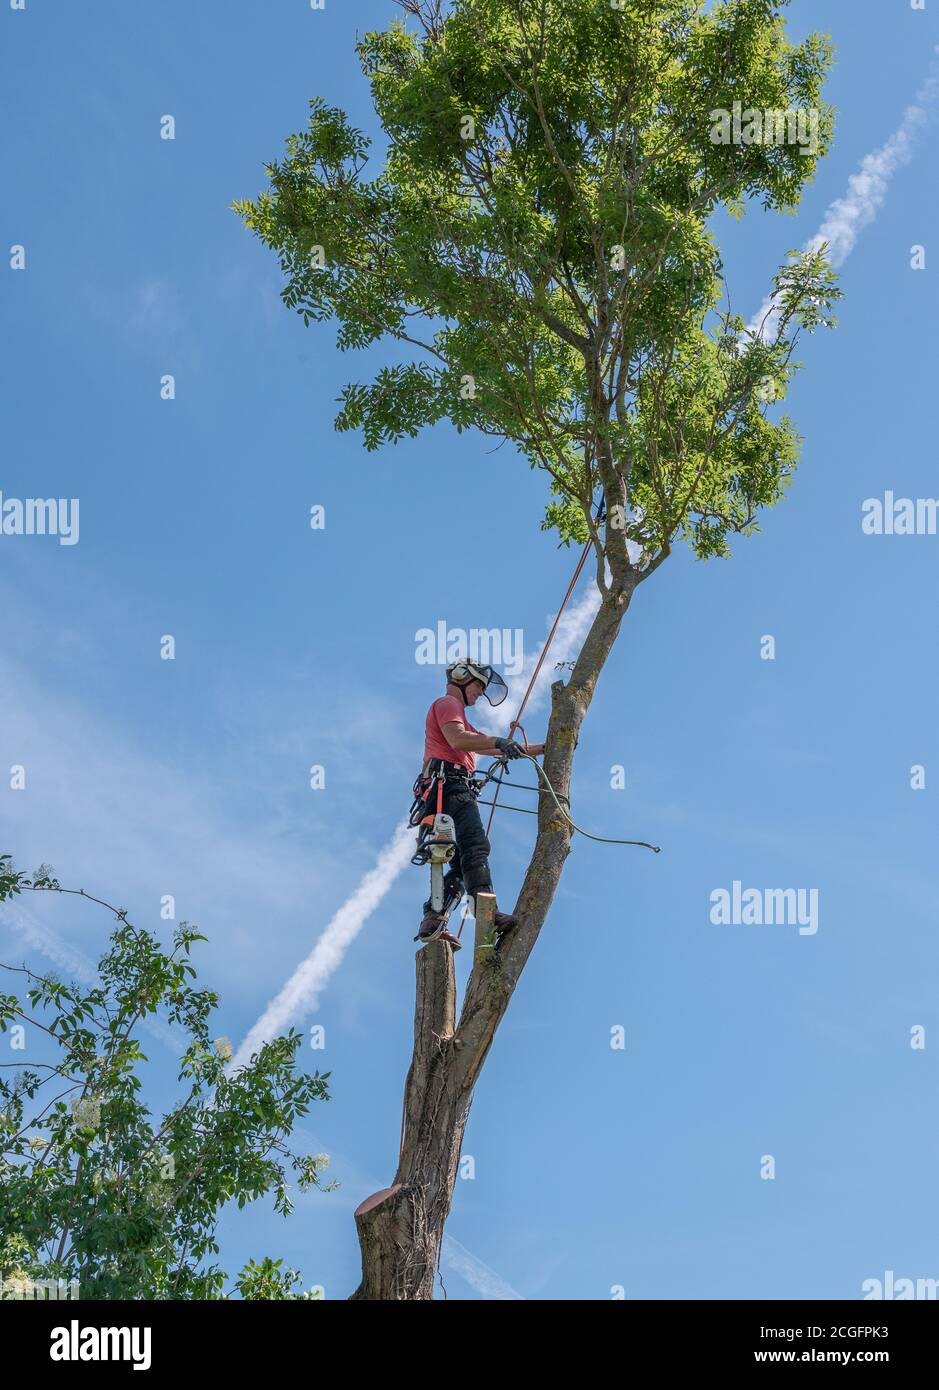 Arborist or tree Surgeon using safety ropes and a harness up a tall tree. Stock Photo